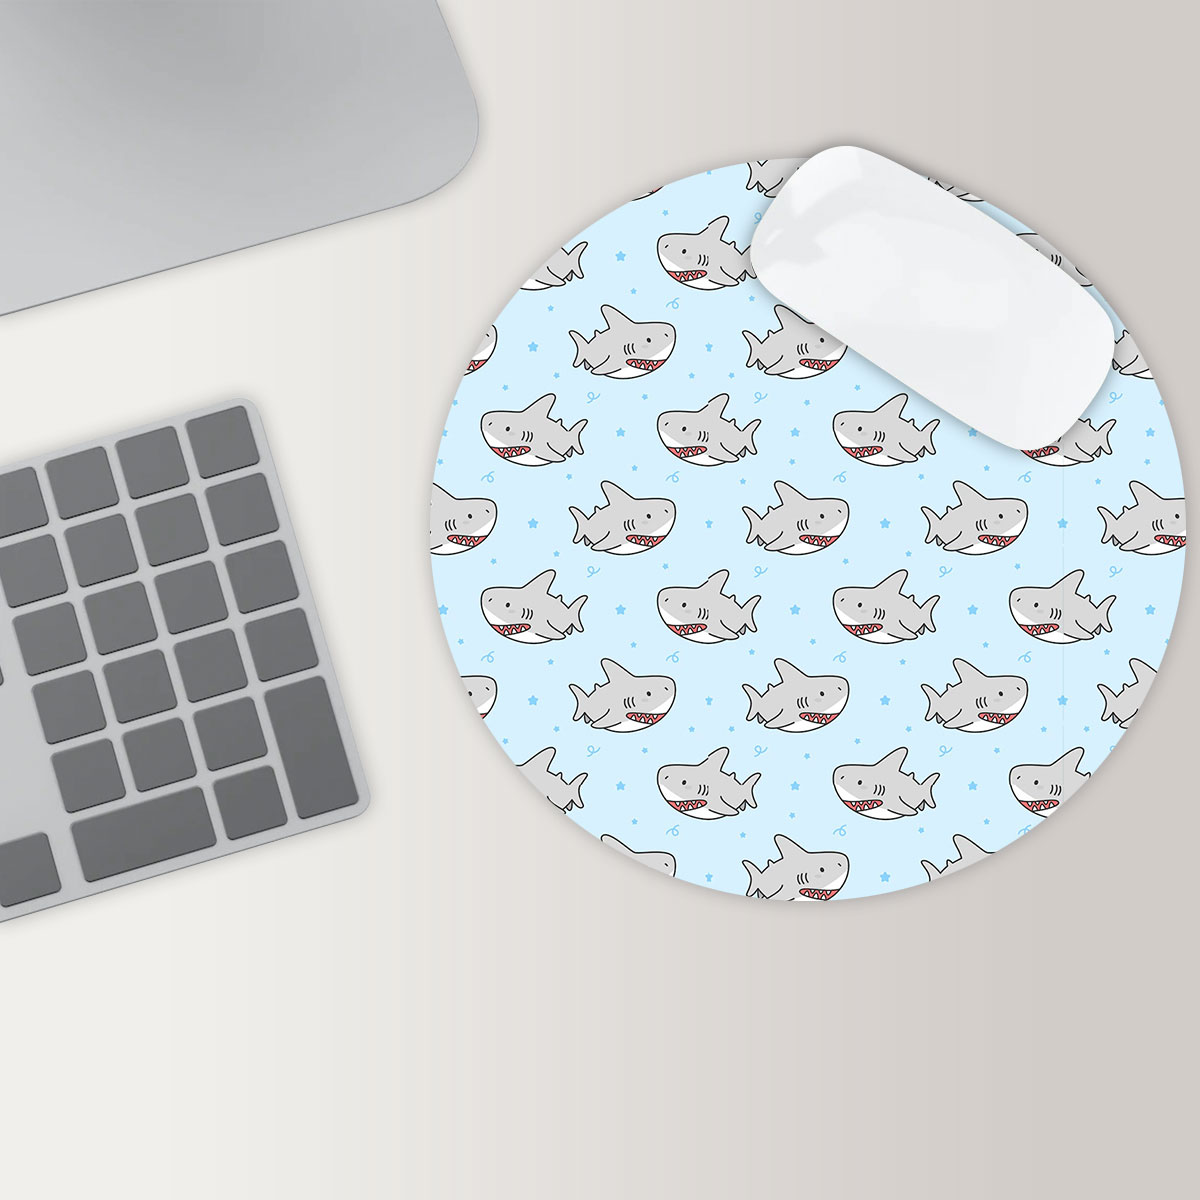 Cartoon Great White Shark Round Mouse Pad